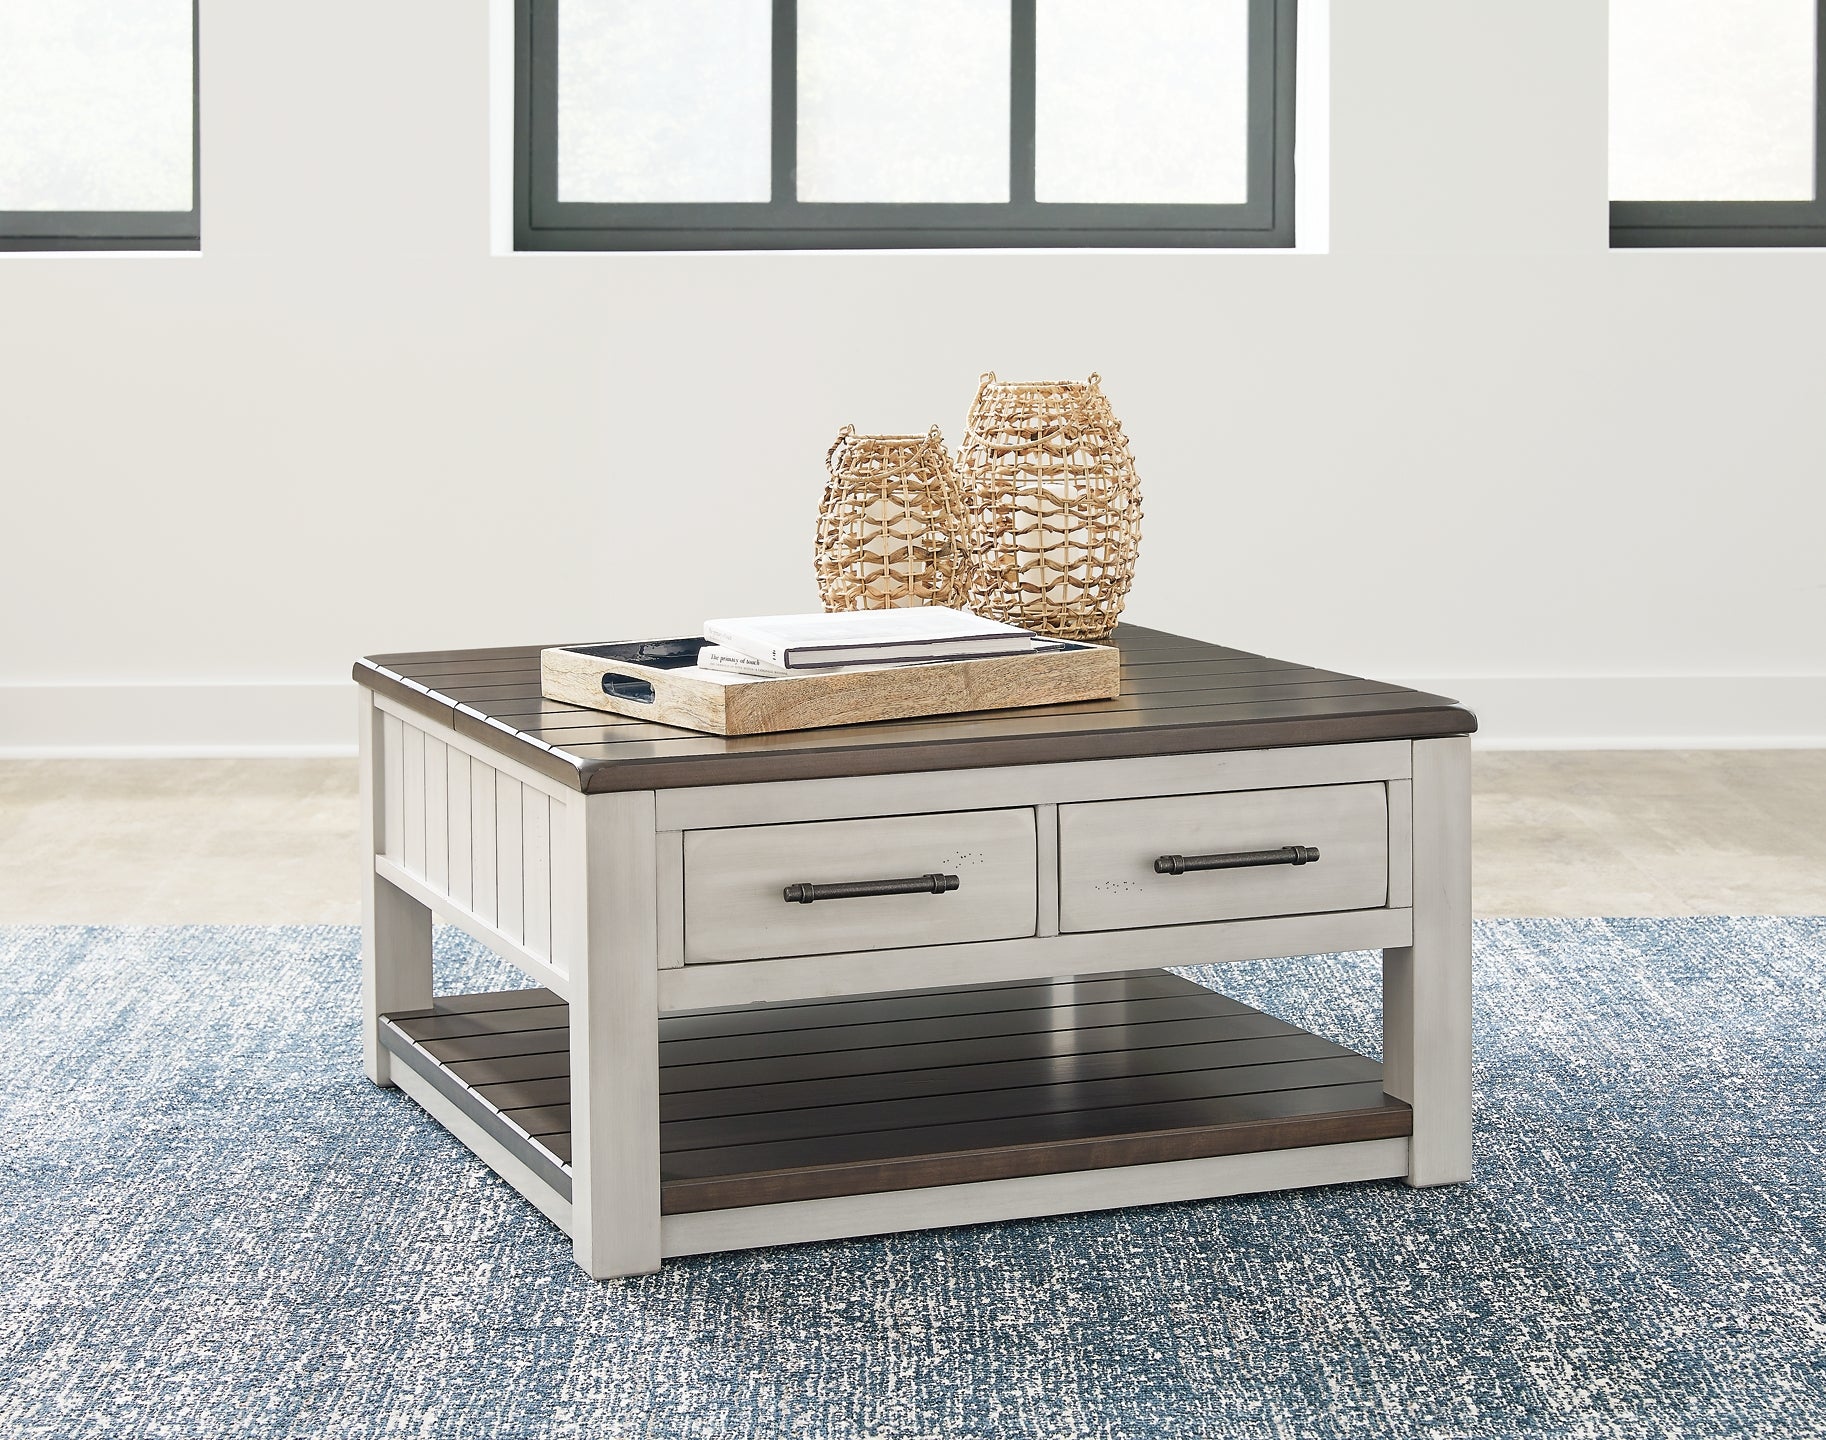 Darborn Coffee Table with 2 End Tables Signature Design by Ashley®